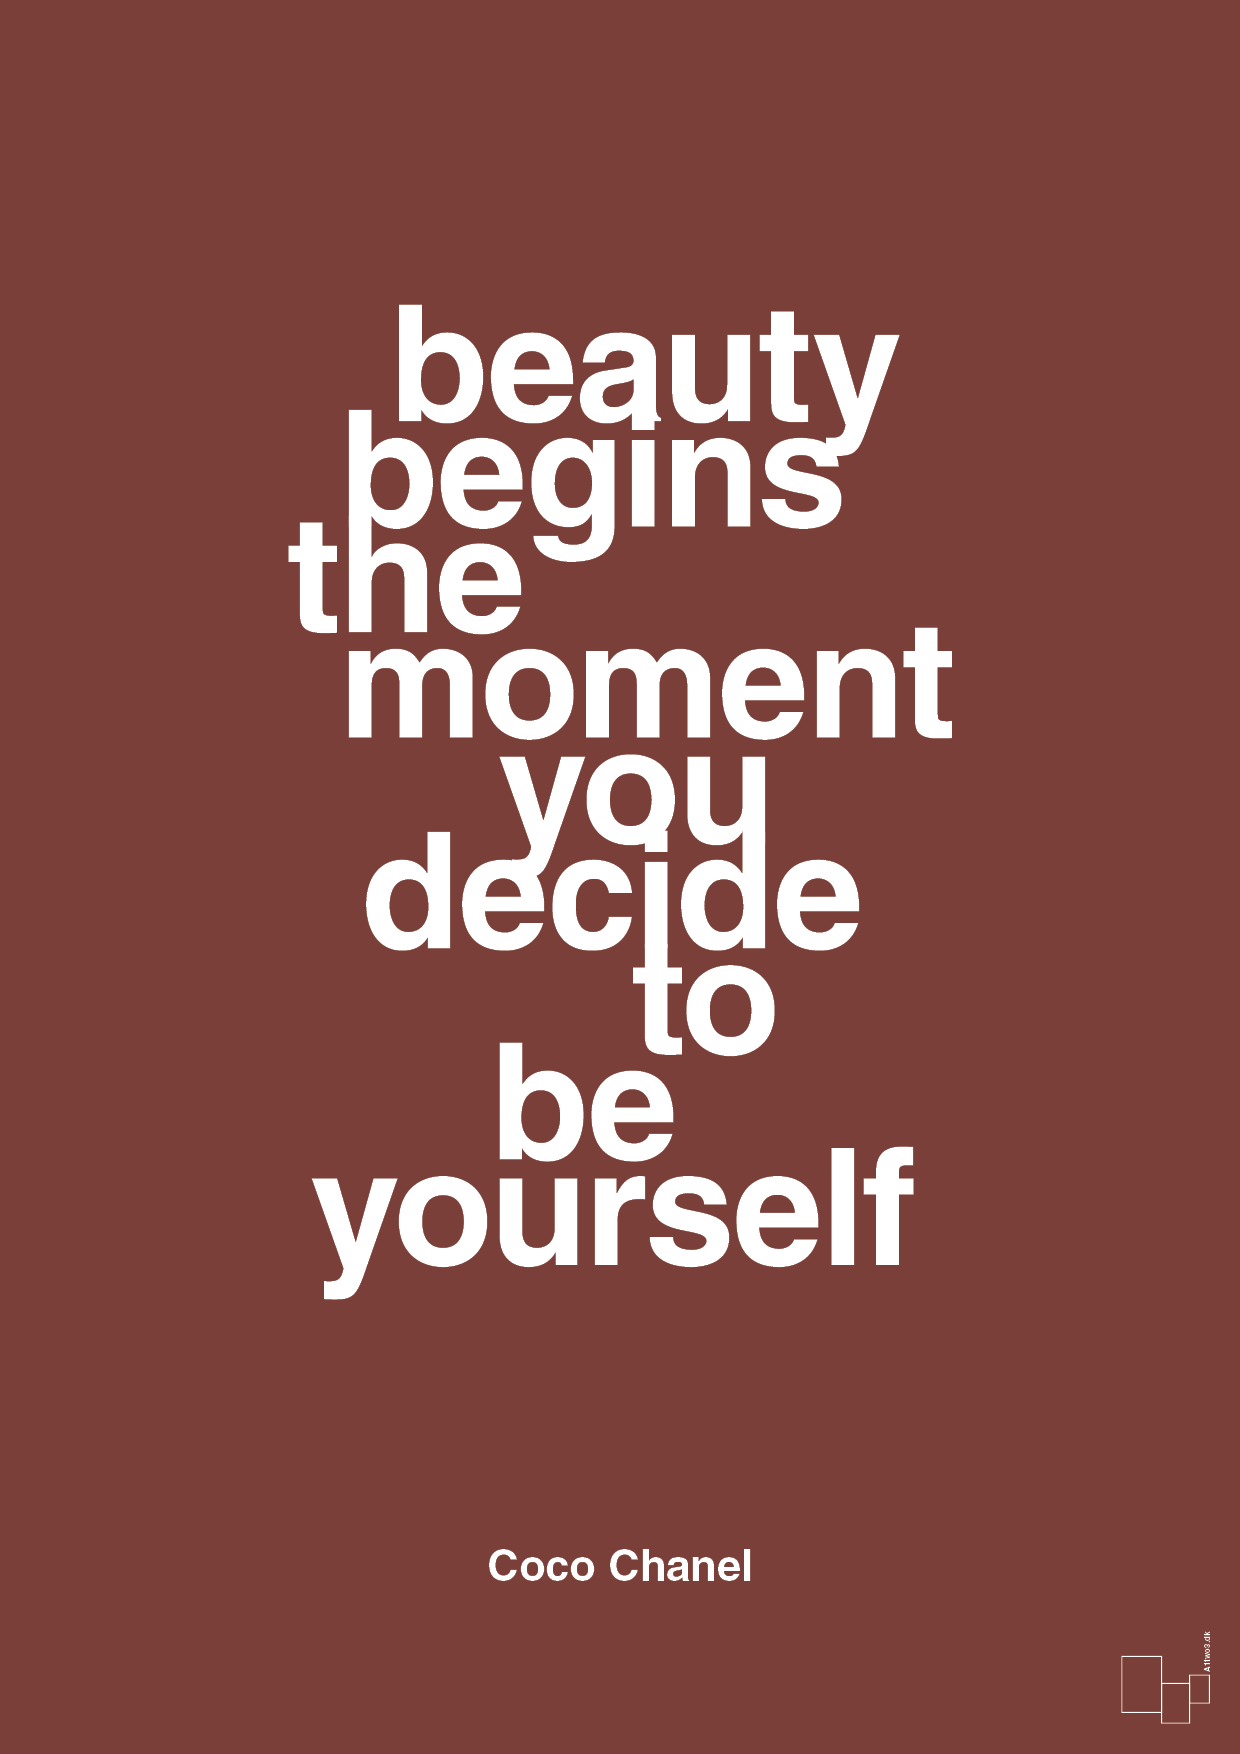 beauty begins the moment you decide to be yourself - Plakat med Citater i Red Pepper